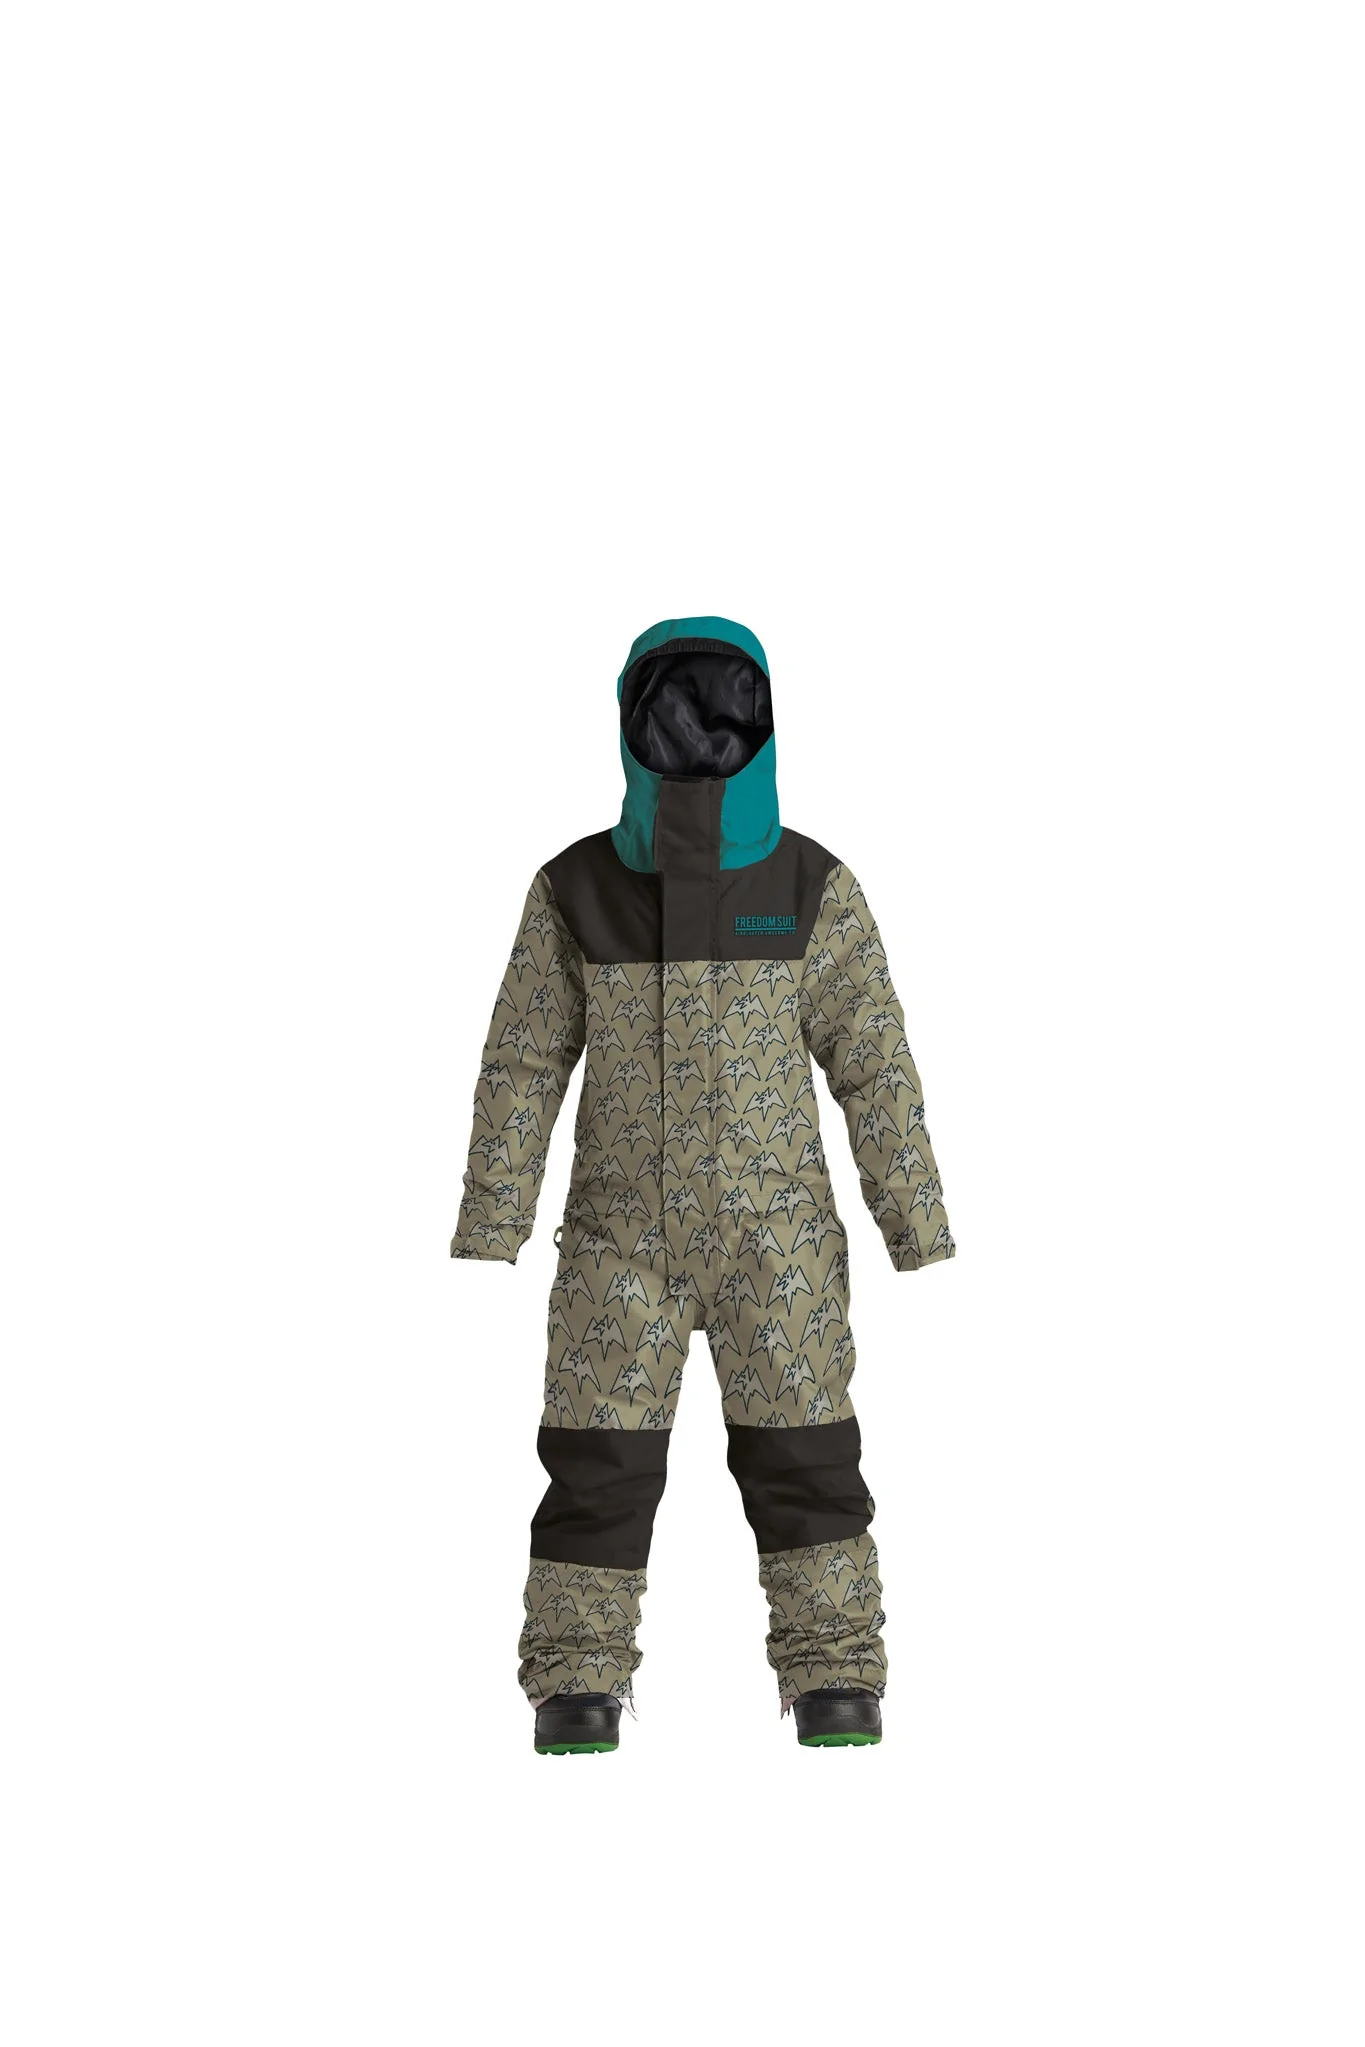 Airblaster Youth Freedom Suit snowboardpak Tan Terry